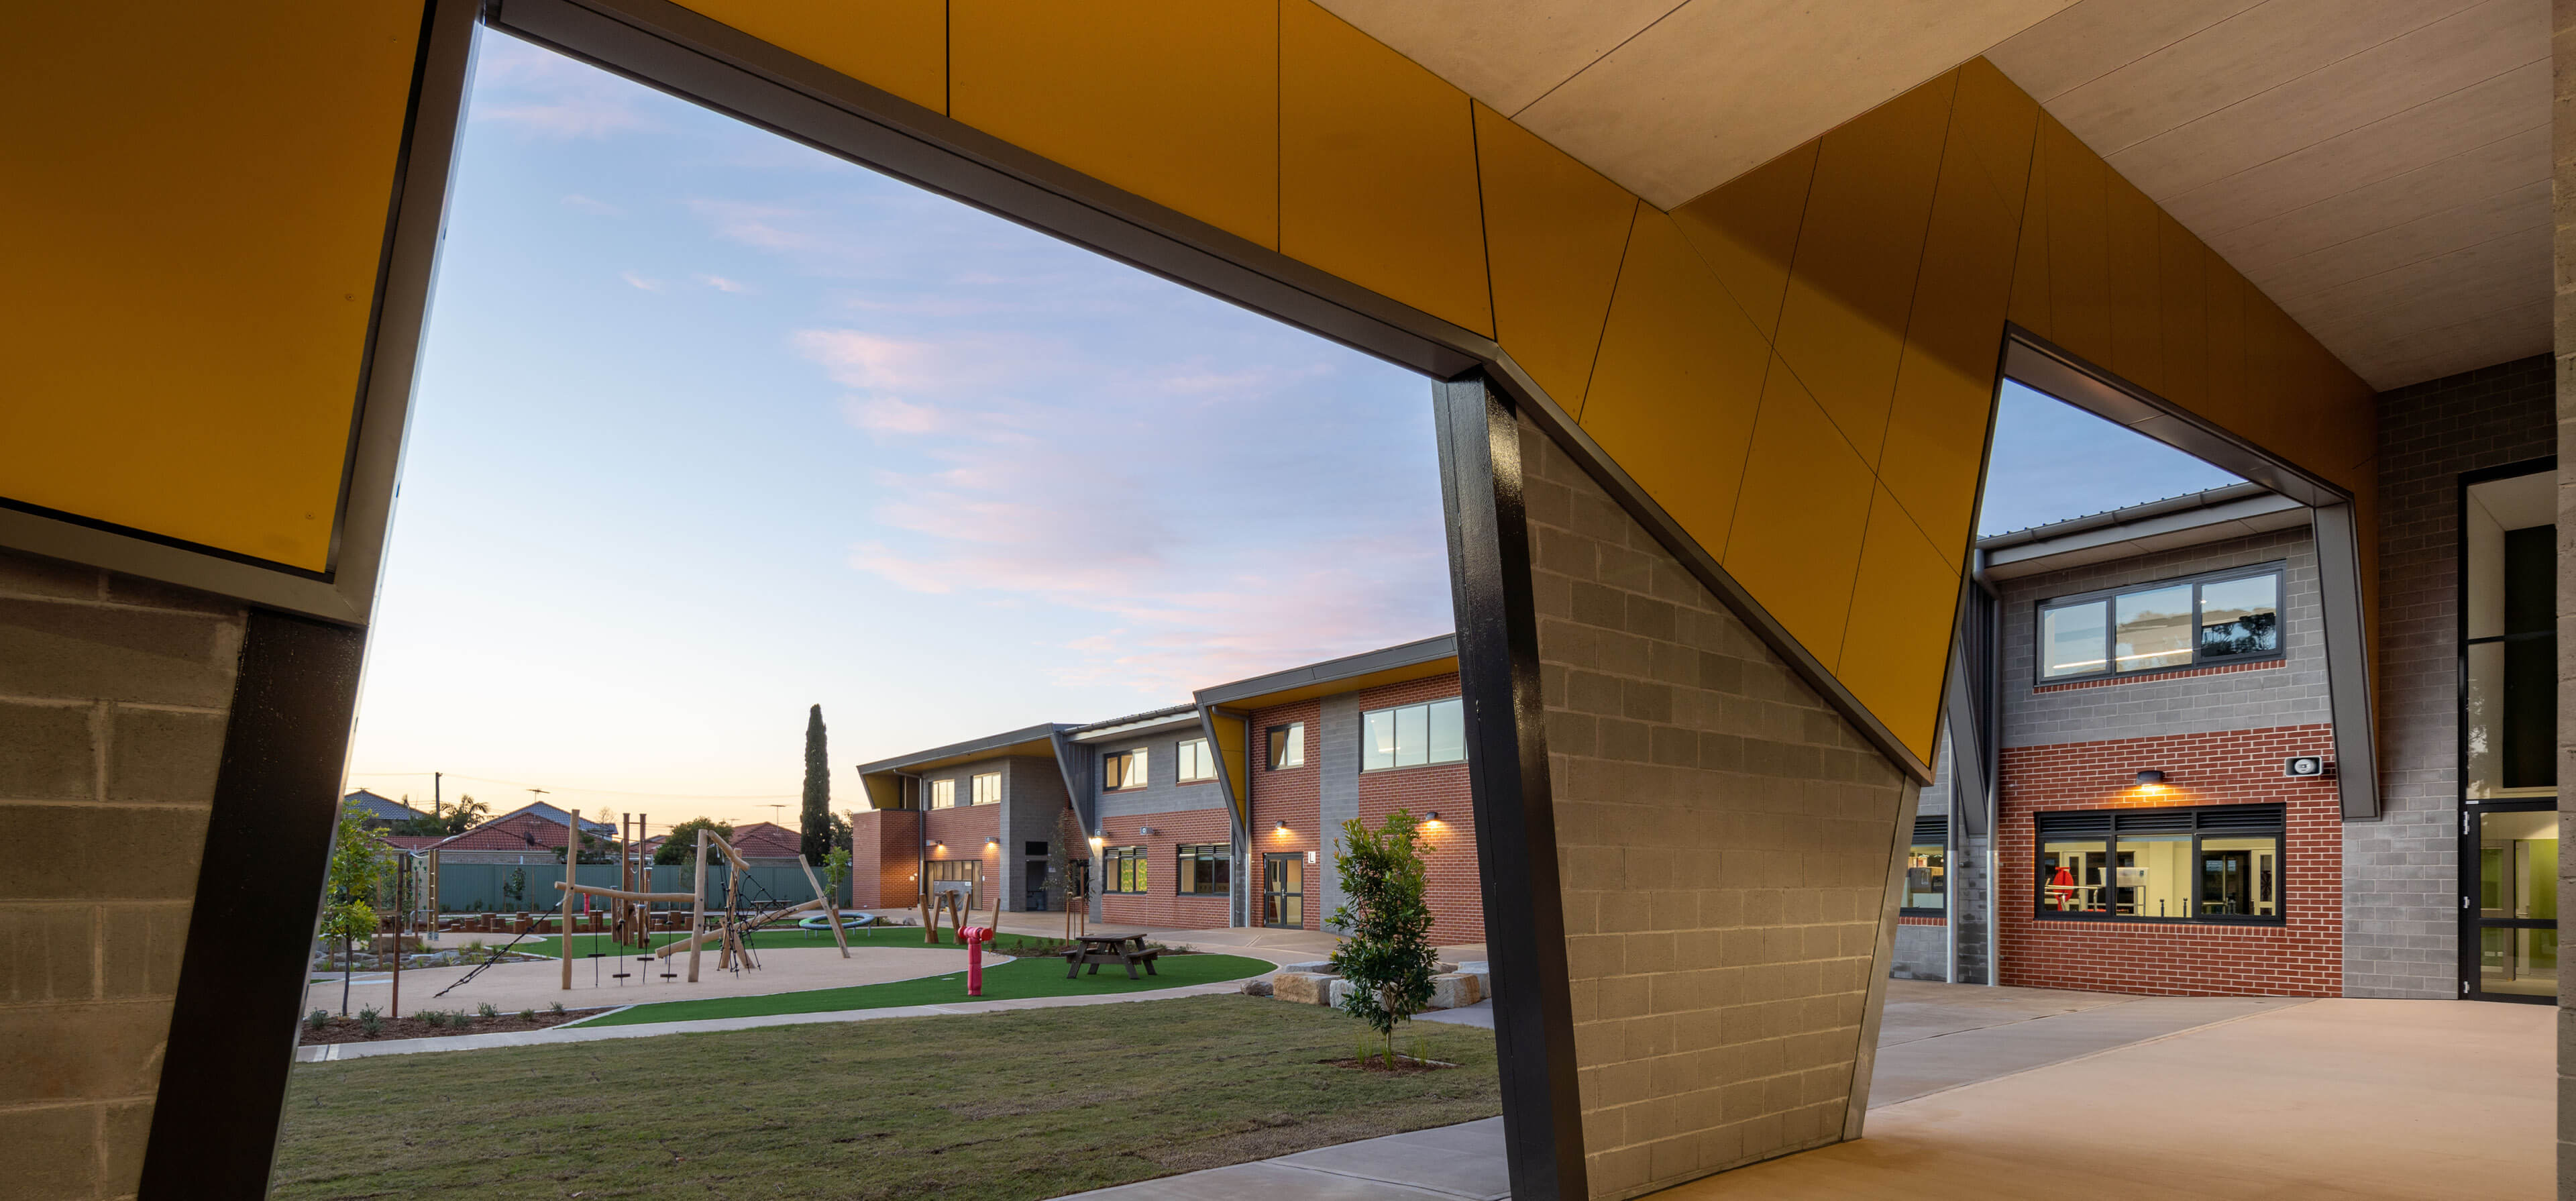 9 outdoor communal areas at kyeemagh public school taylor construction education